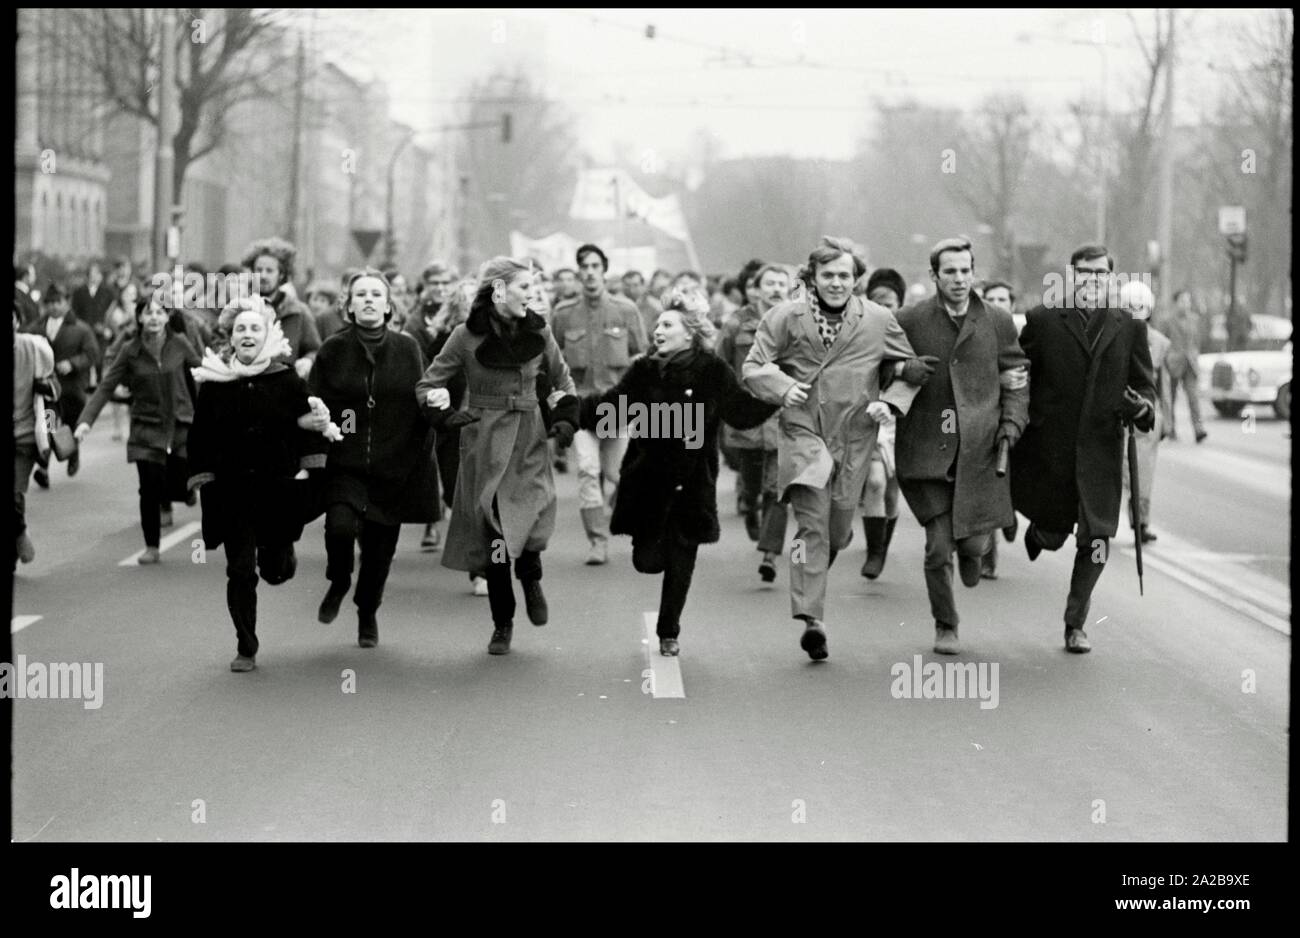 Germany. Frankfurt. 1.February 1969. 1000 Frankfurter students rallying against the state of emergency in Spain.   Copyright Notice: Max Scheler/SZ Photo. Stock Photo